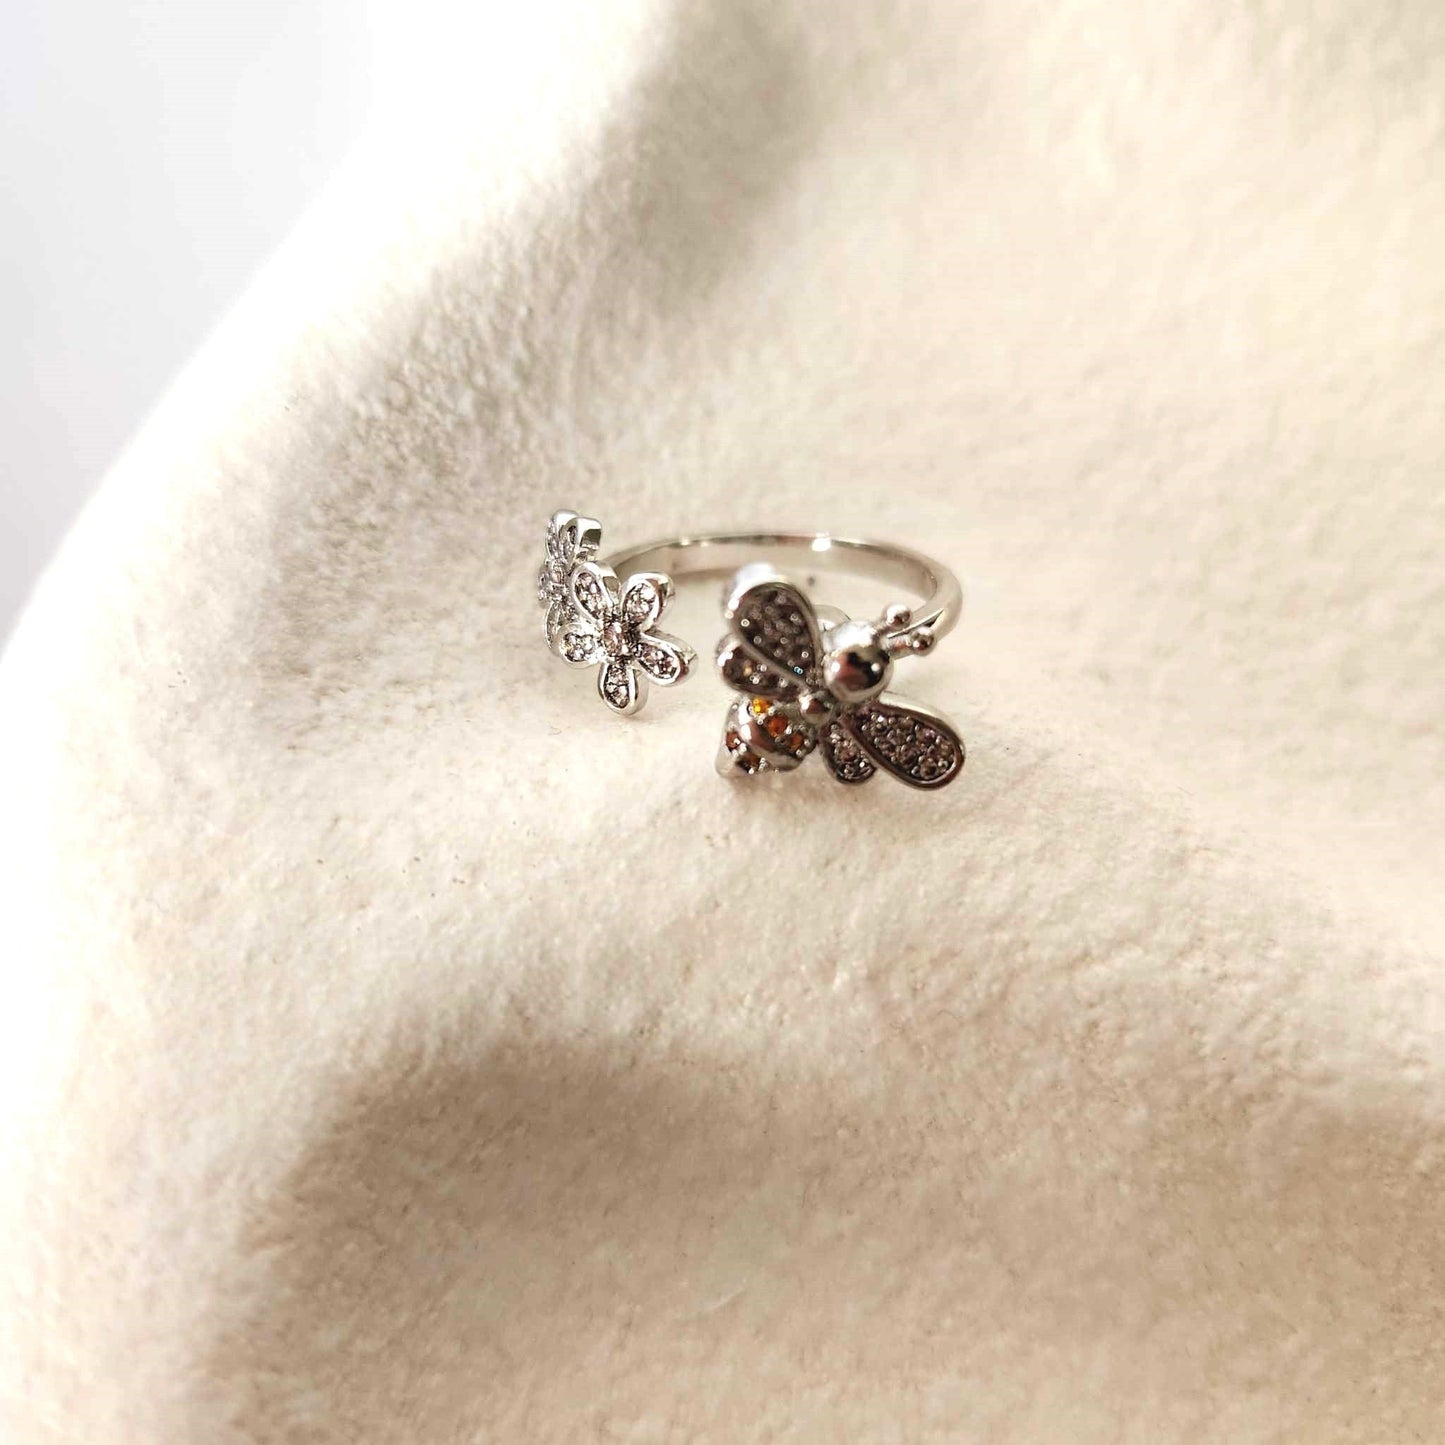 Double Flower Bumble Bee Ring -  Fidget Anxiety Ring